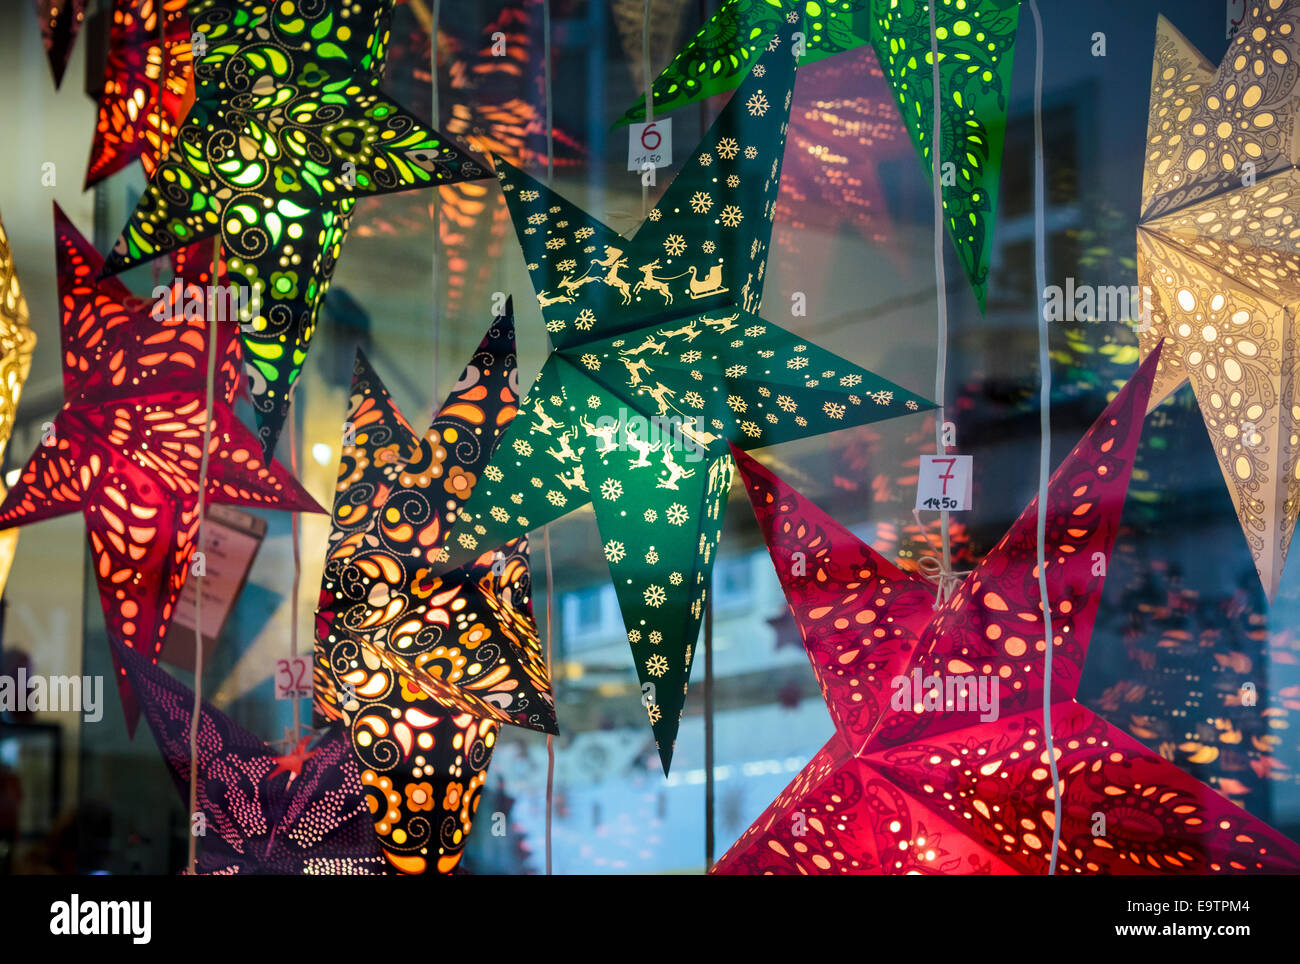 Festive star-shaped paper lanterns for sale at a German Christmas market  Stock Photo - Alamy